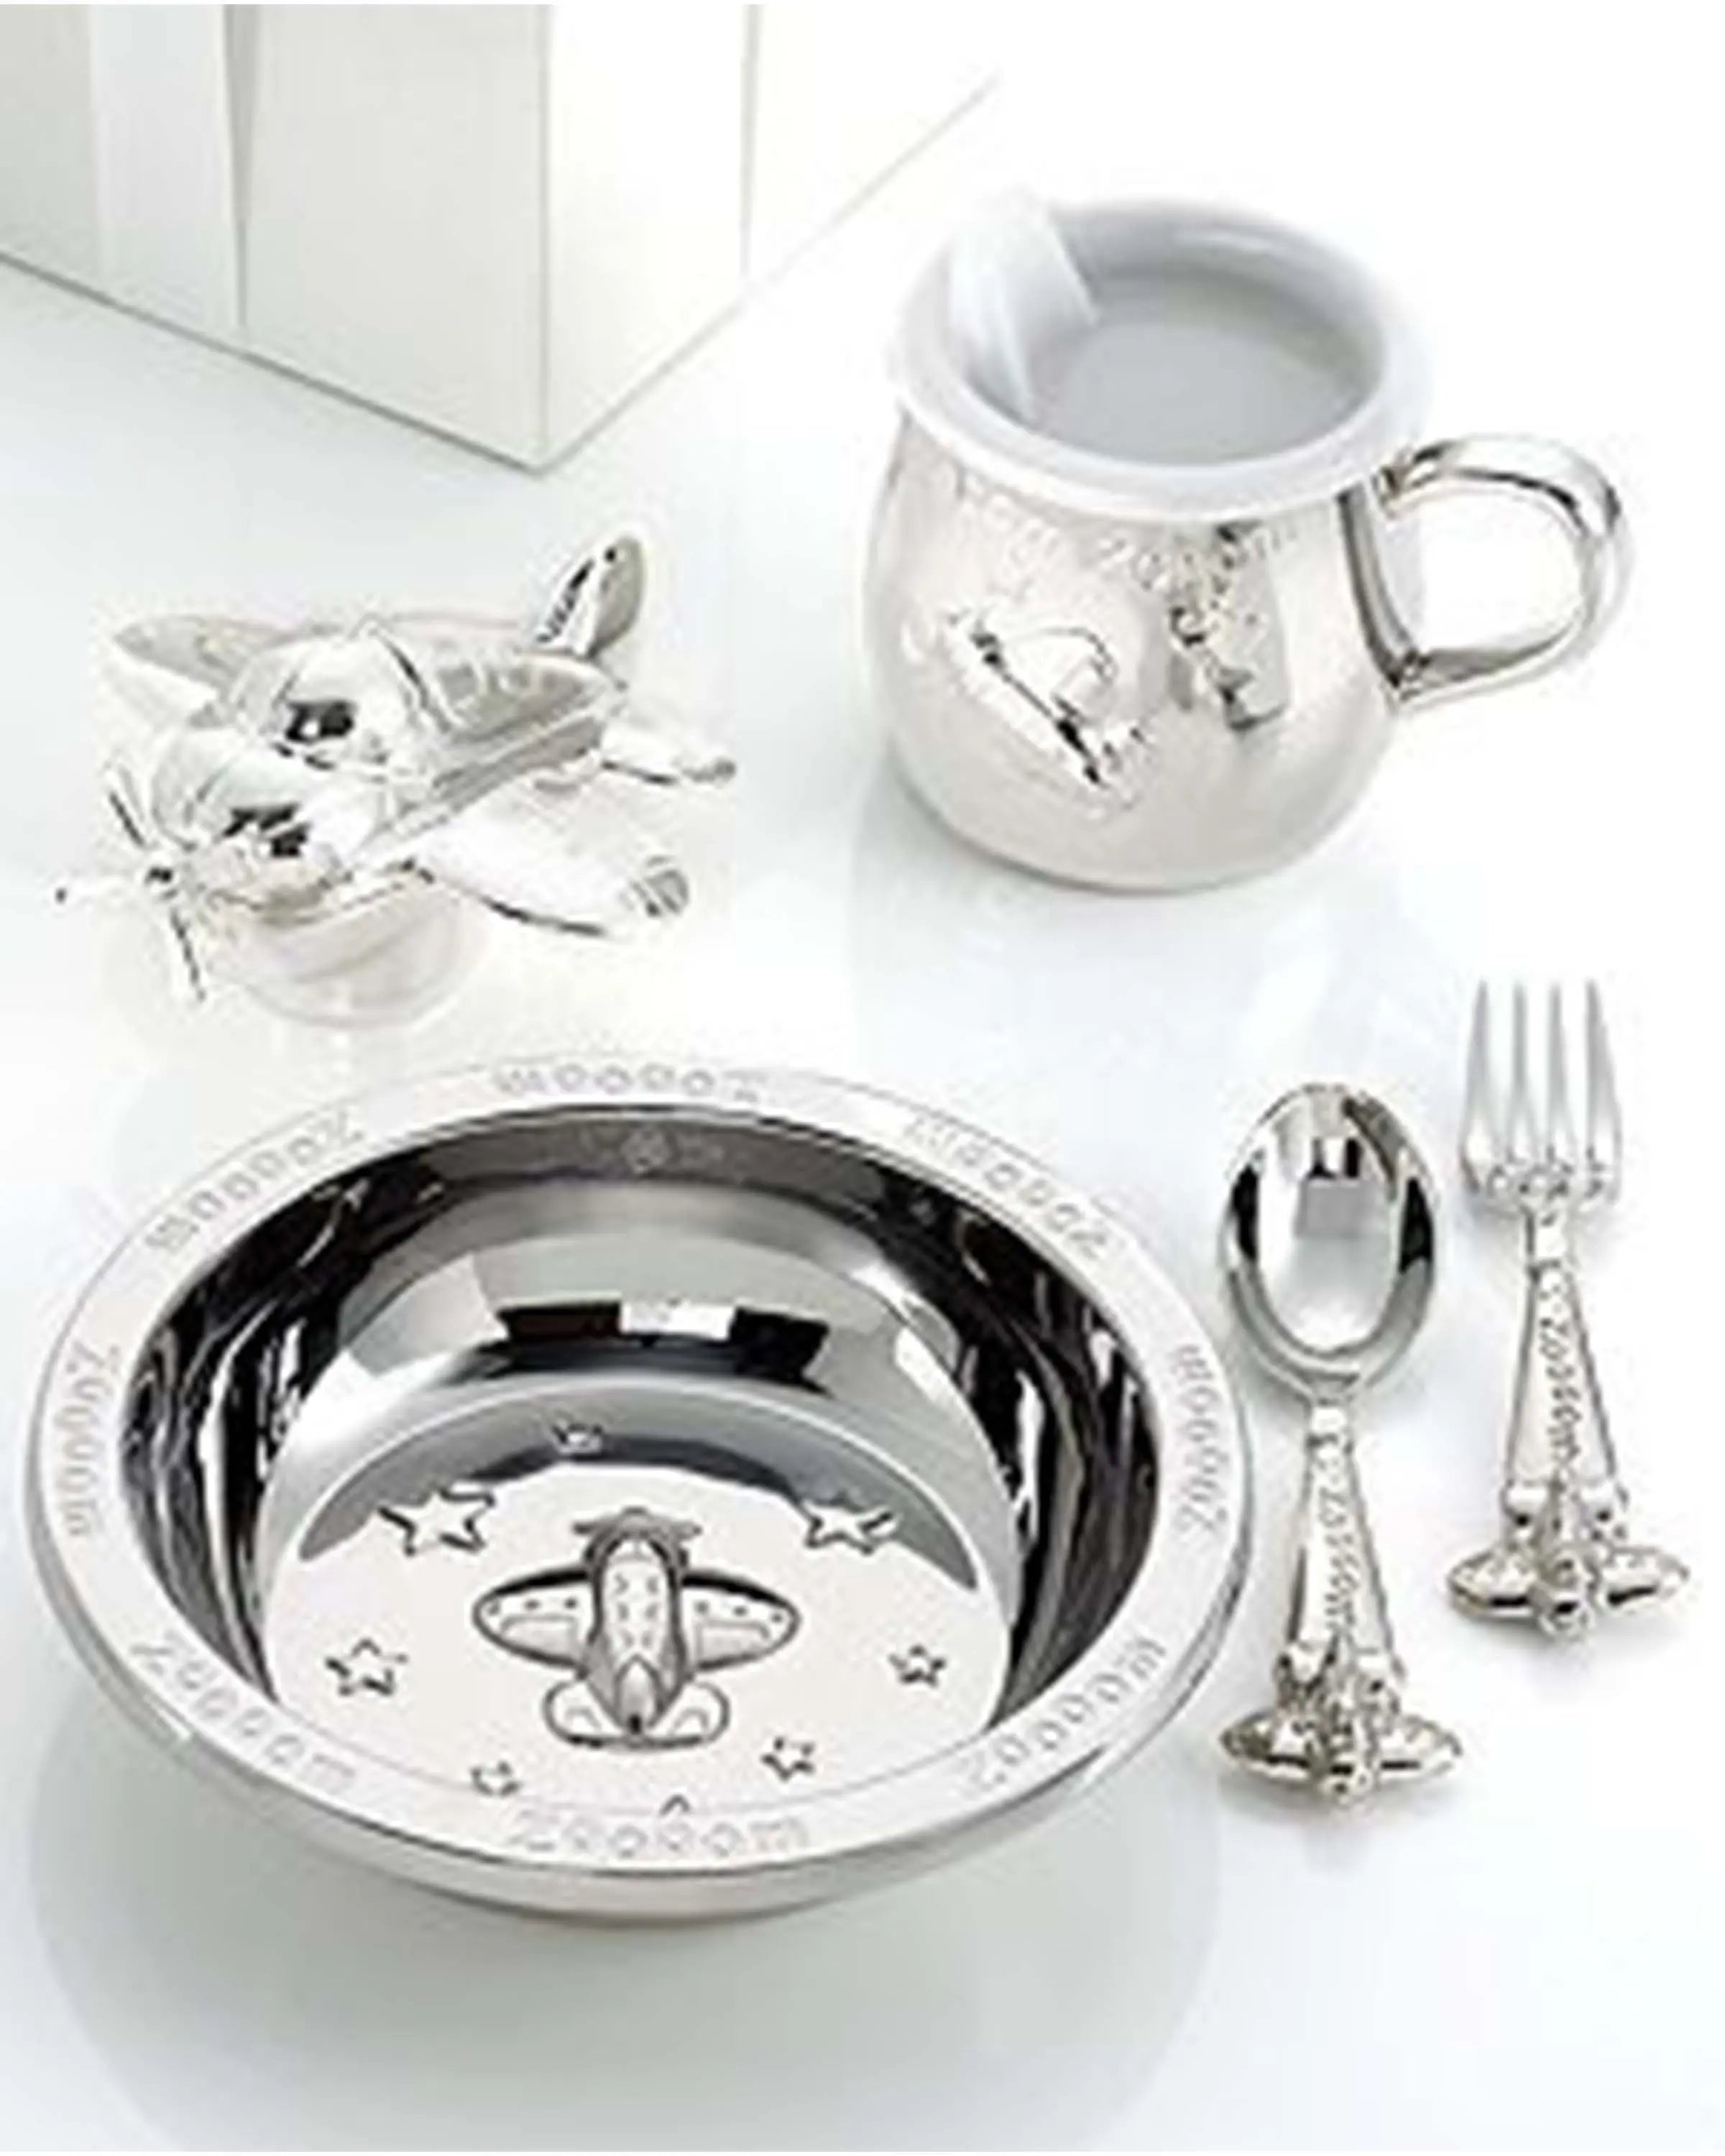 Gift Ideas for Baby Girls That are Unique - Templeton Silver